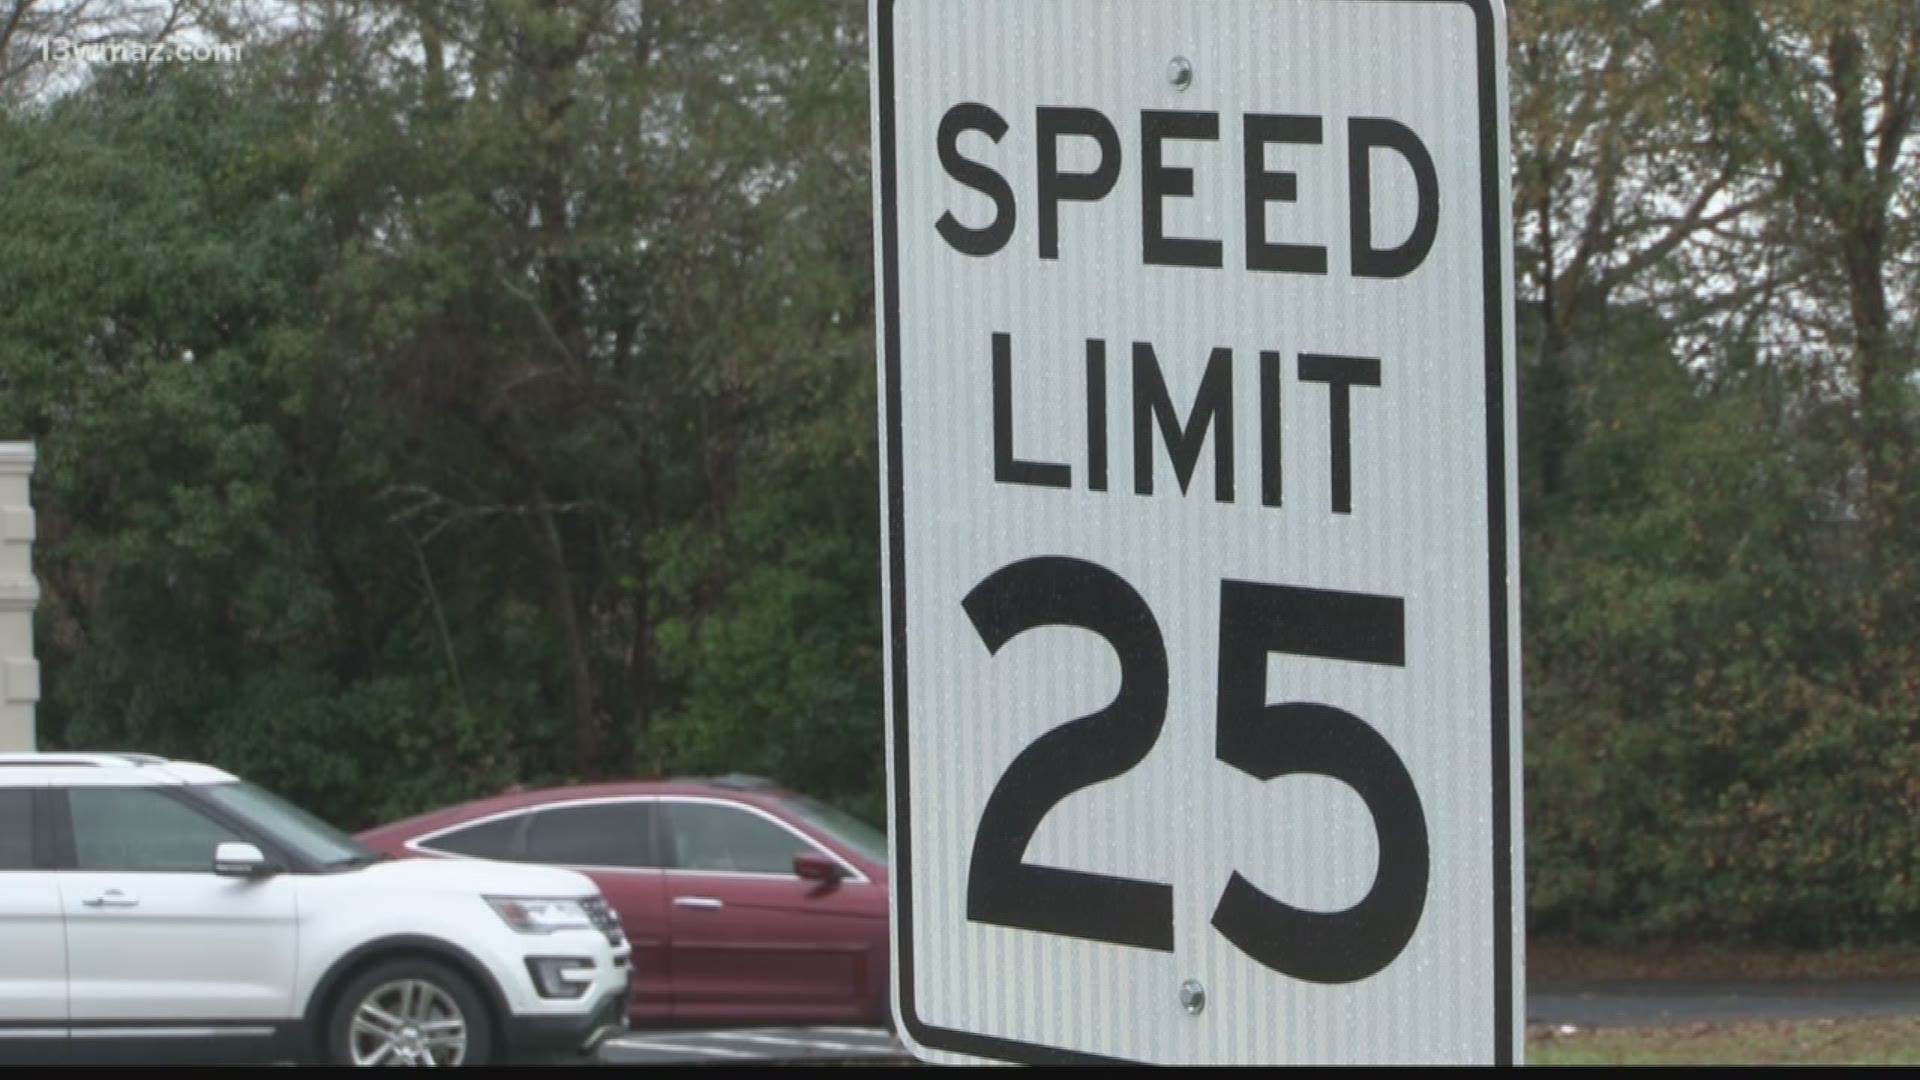 Byron Police say one city road has seen an increase in traffic, and now they have a plan to make it safer.